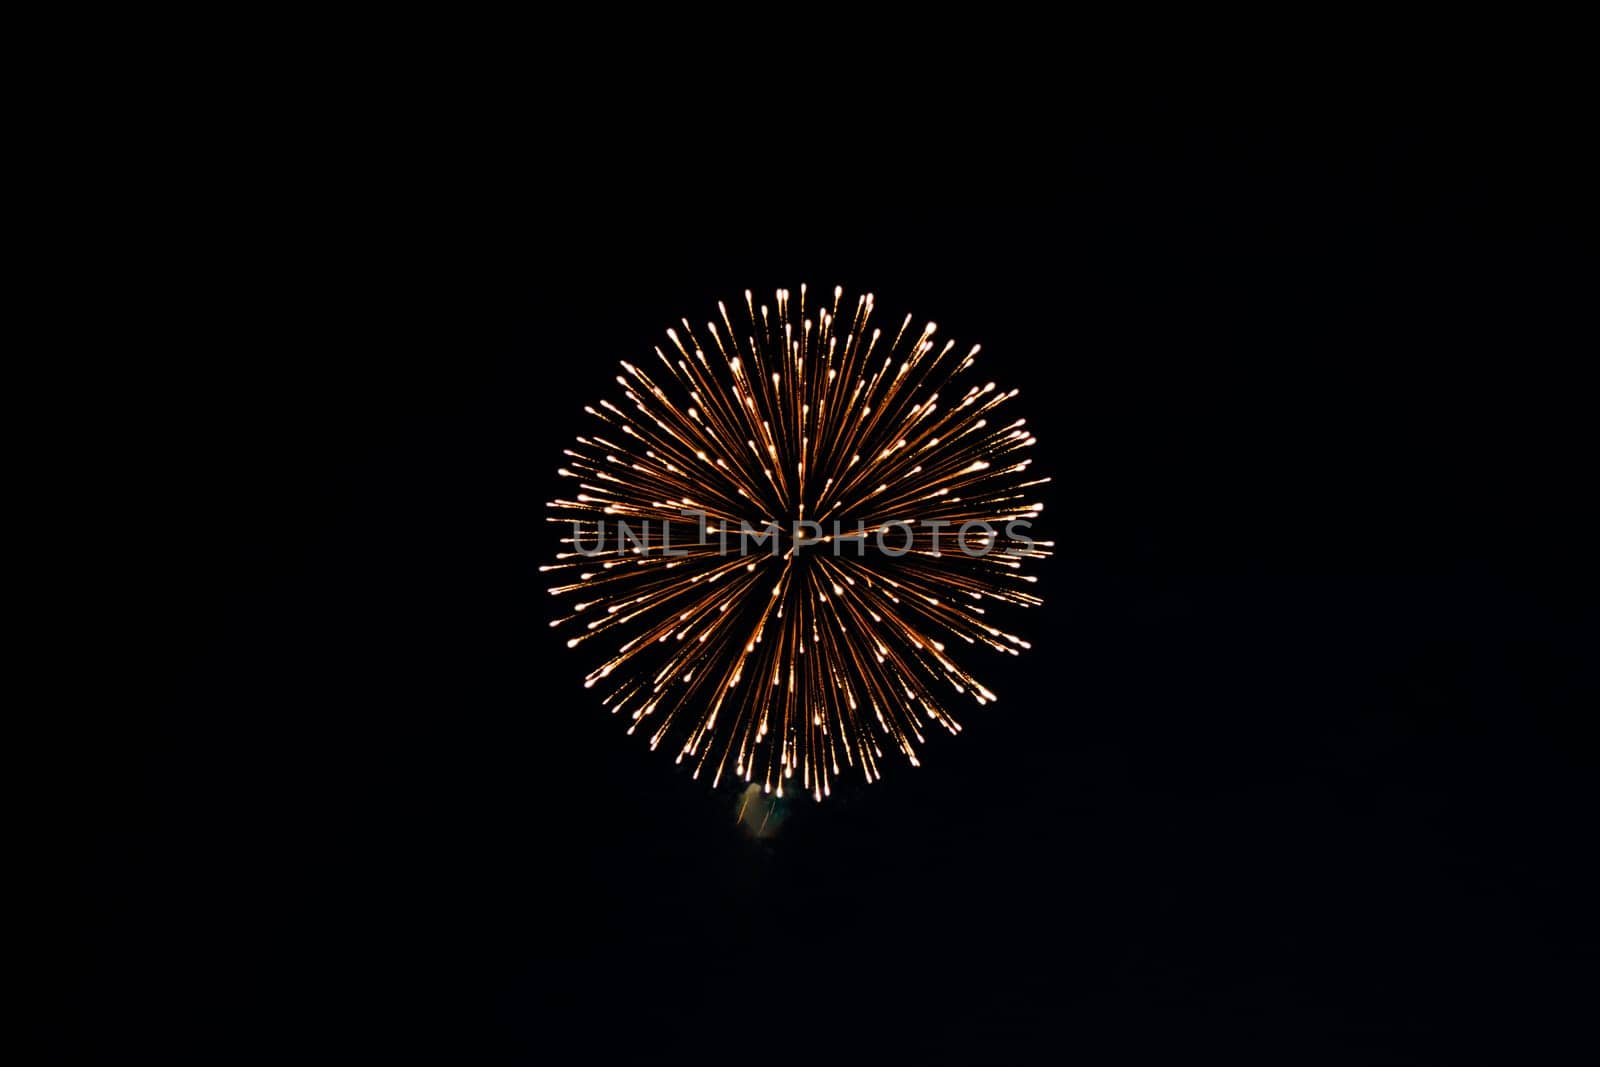 A yellow and white firework by jameshumble